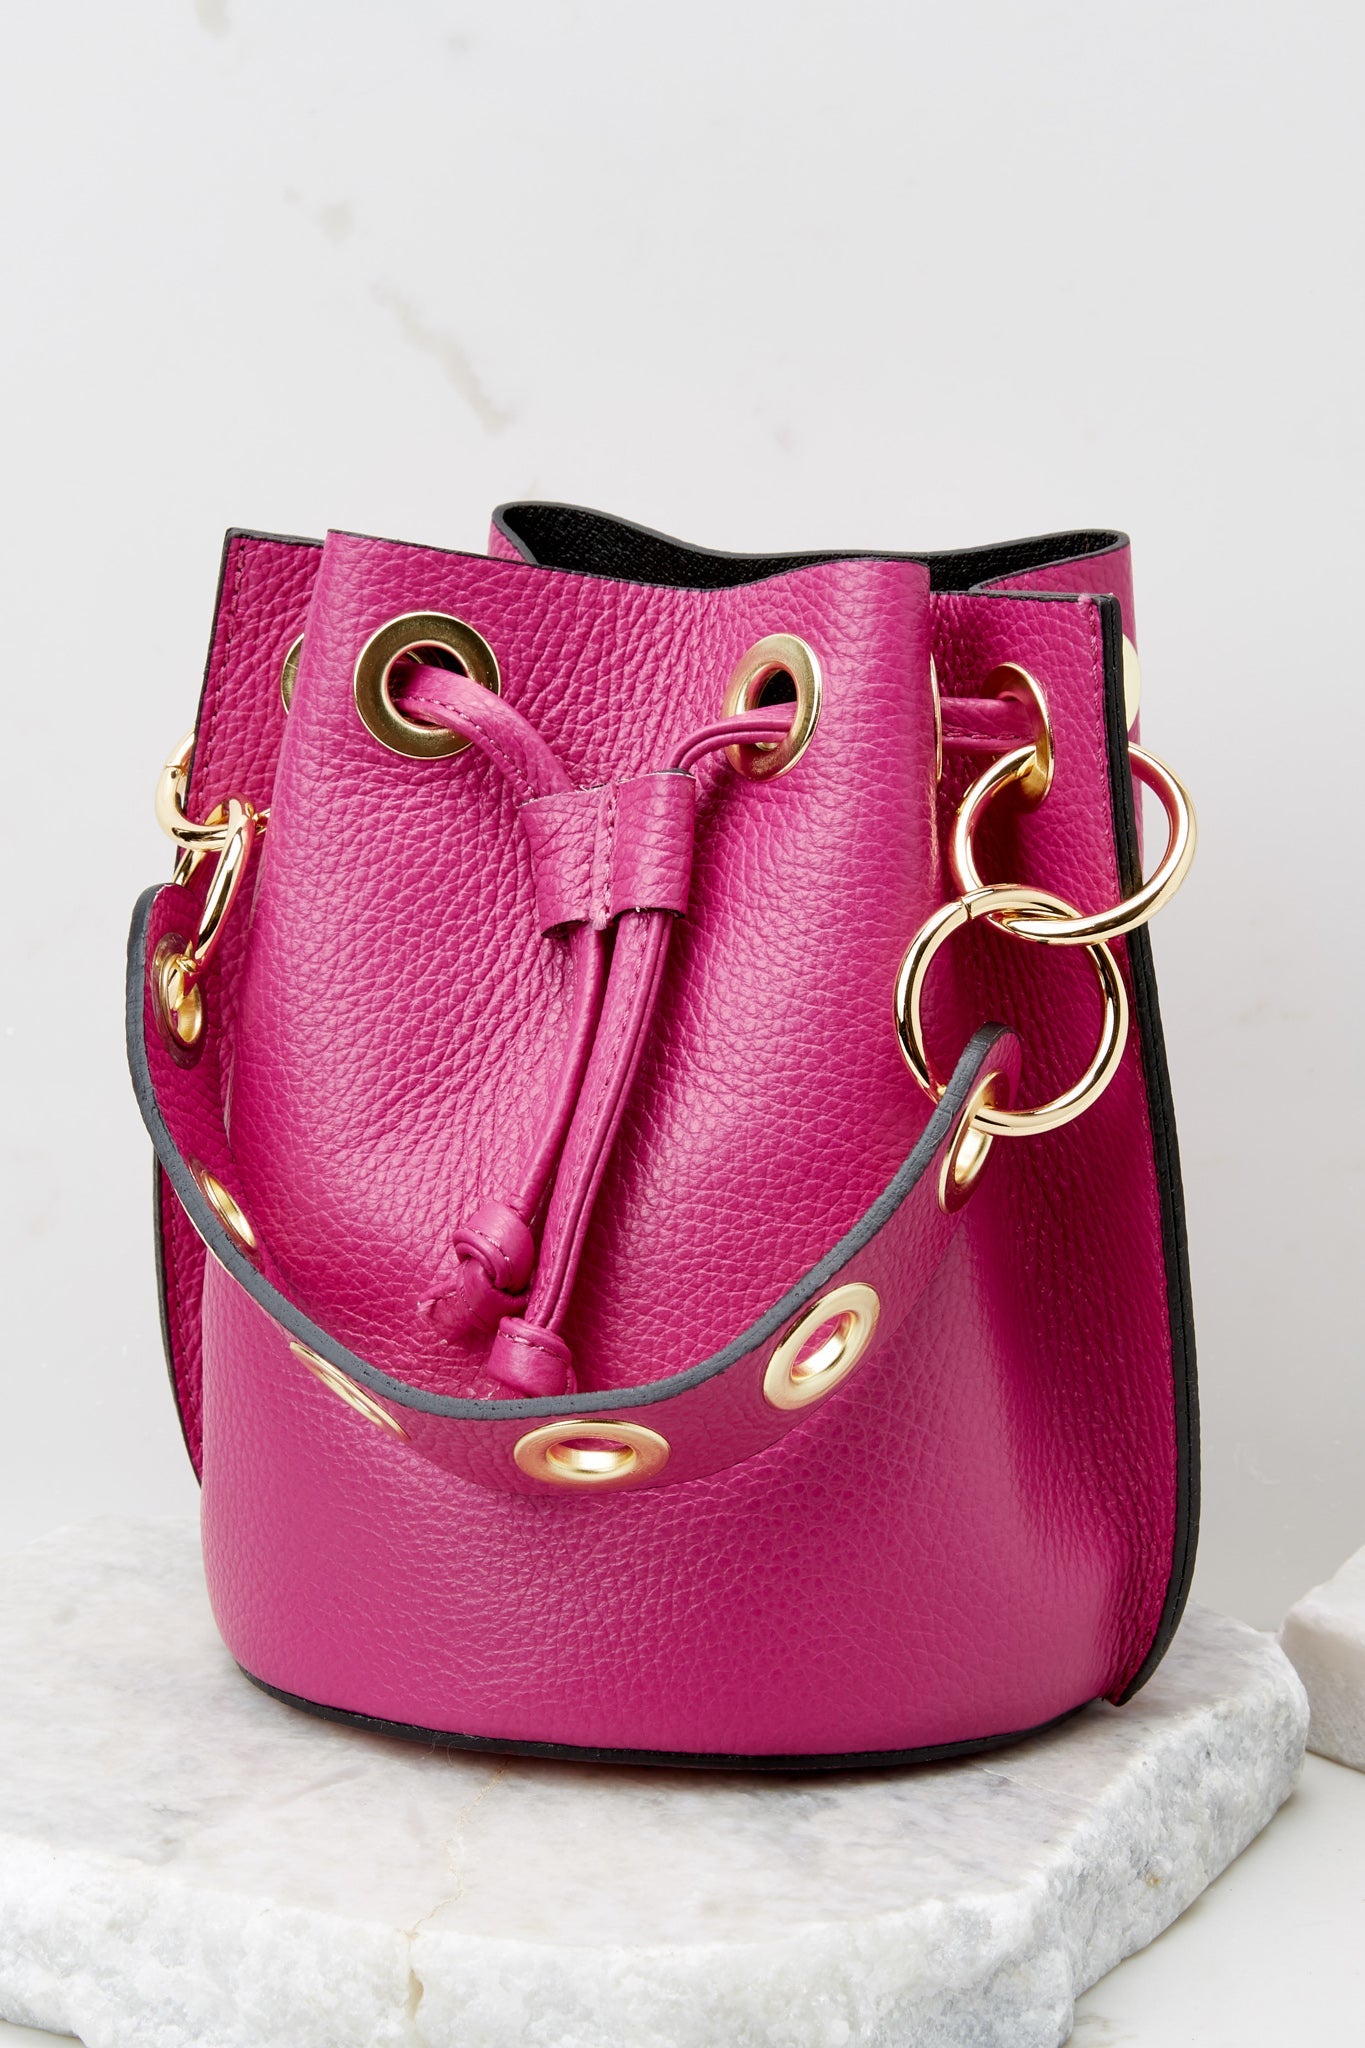 Drawn To You Hot Pink Leather Bag - Red Dress